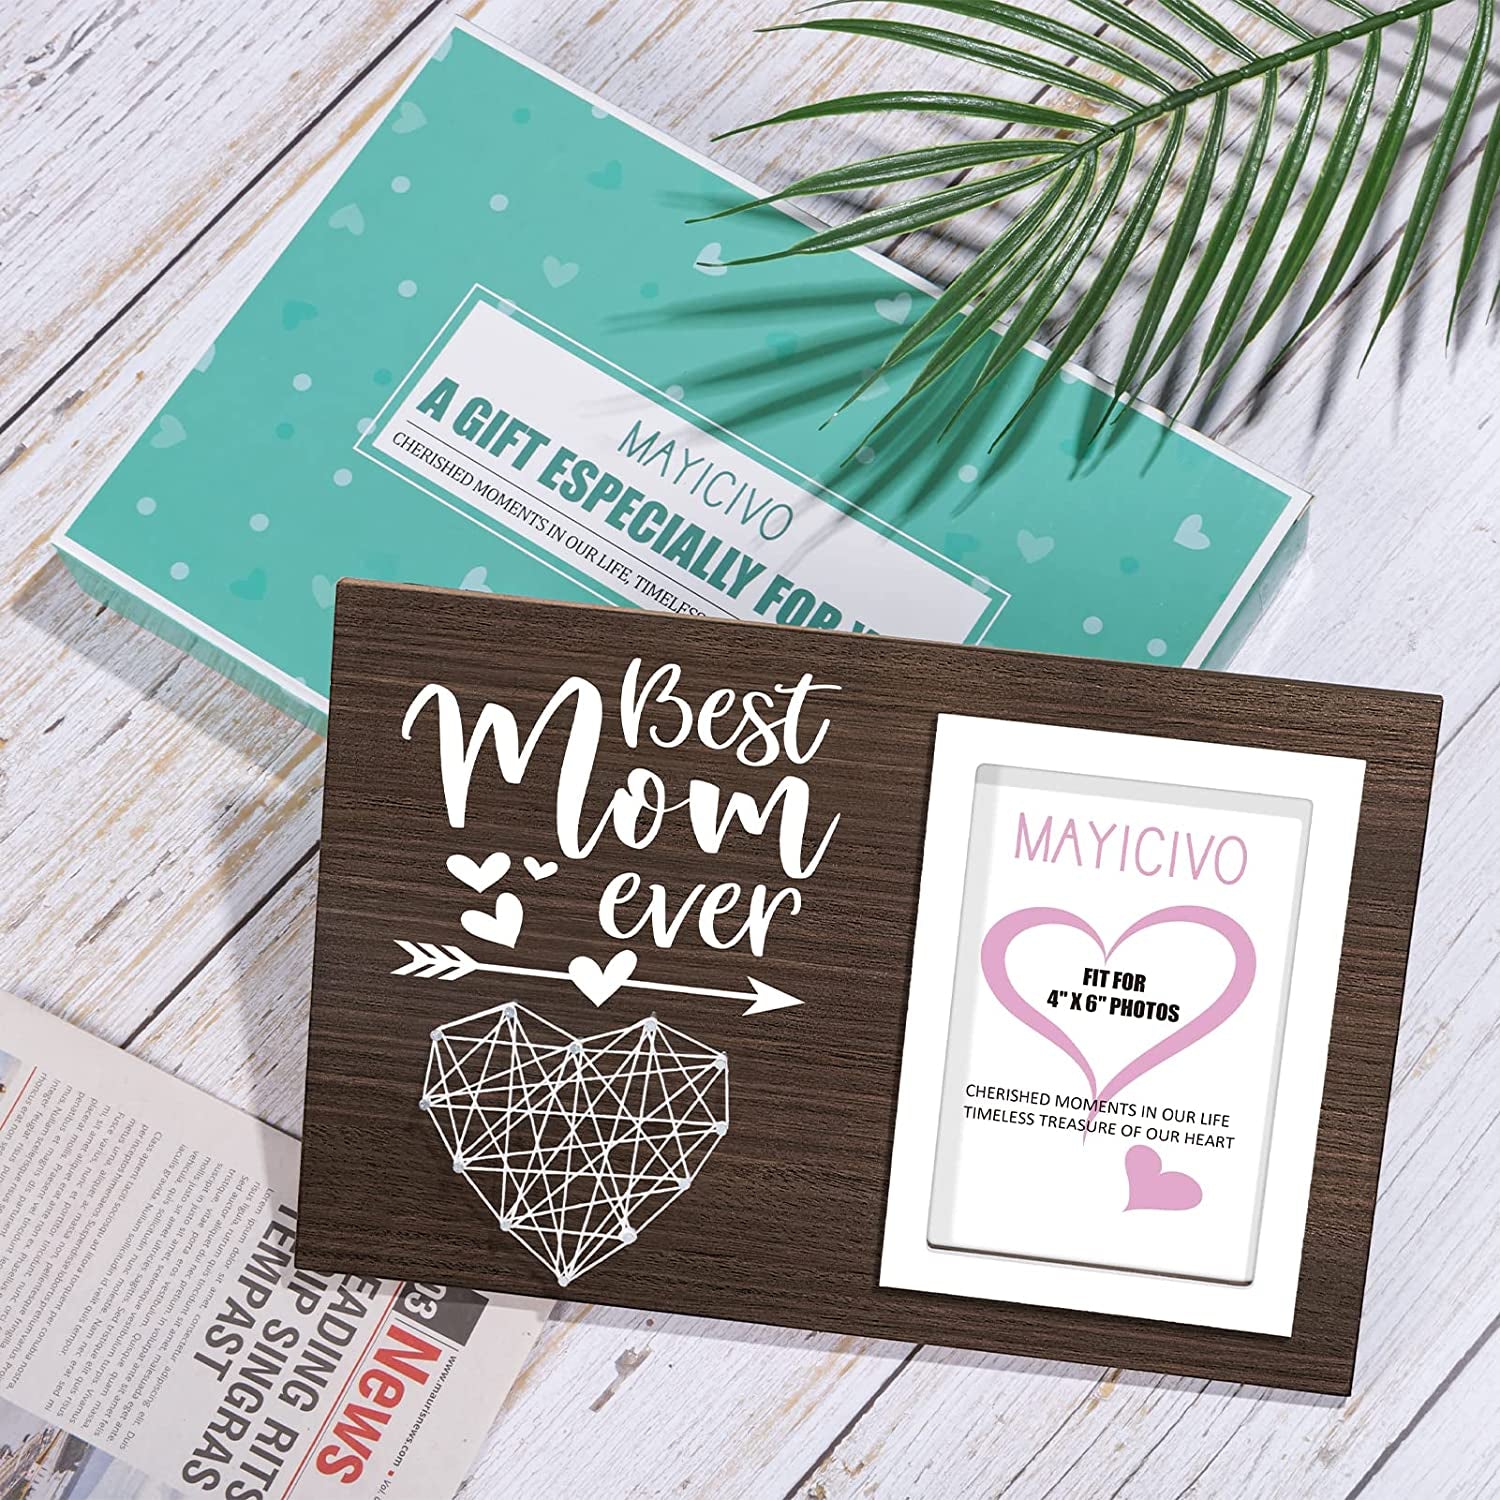 Best Mom Gifts Mothers Day Gifts for Mom from Daughter Son Kids, Mom Picture Frame Mother-In-Law Gifts New Mom Gifts for Women, Birthday Gifts for Mom Mothers Day Gifts for Wife from Husband-4X6 Photo